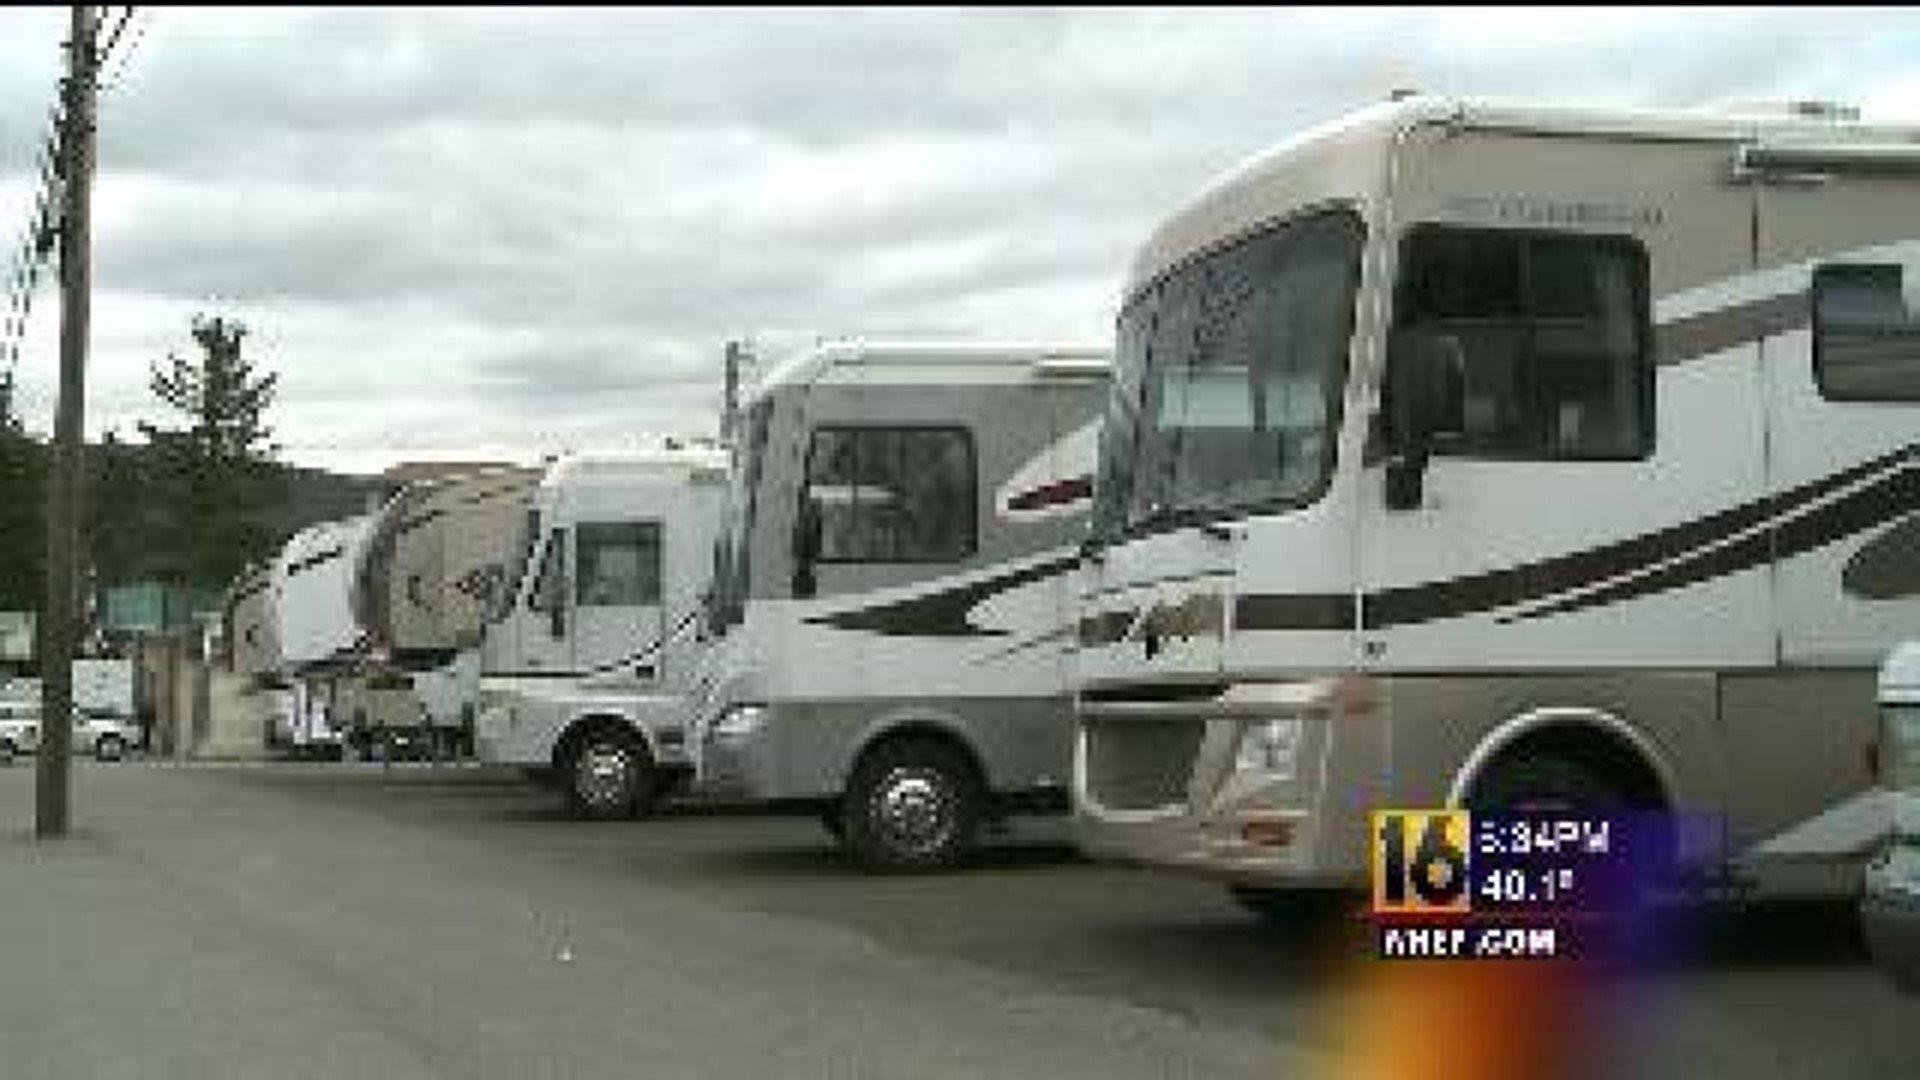 Business Booming for RV Sales